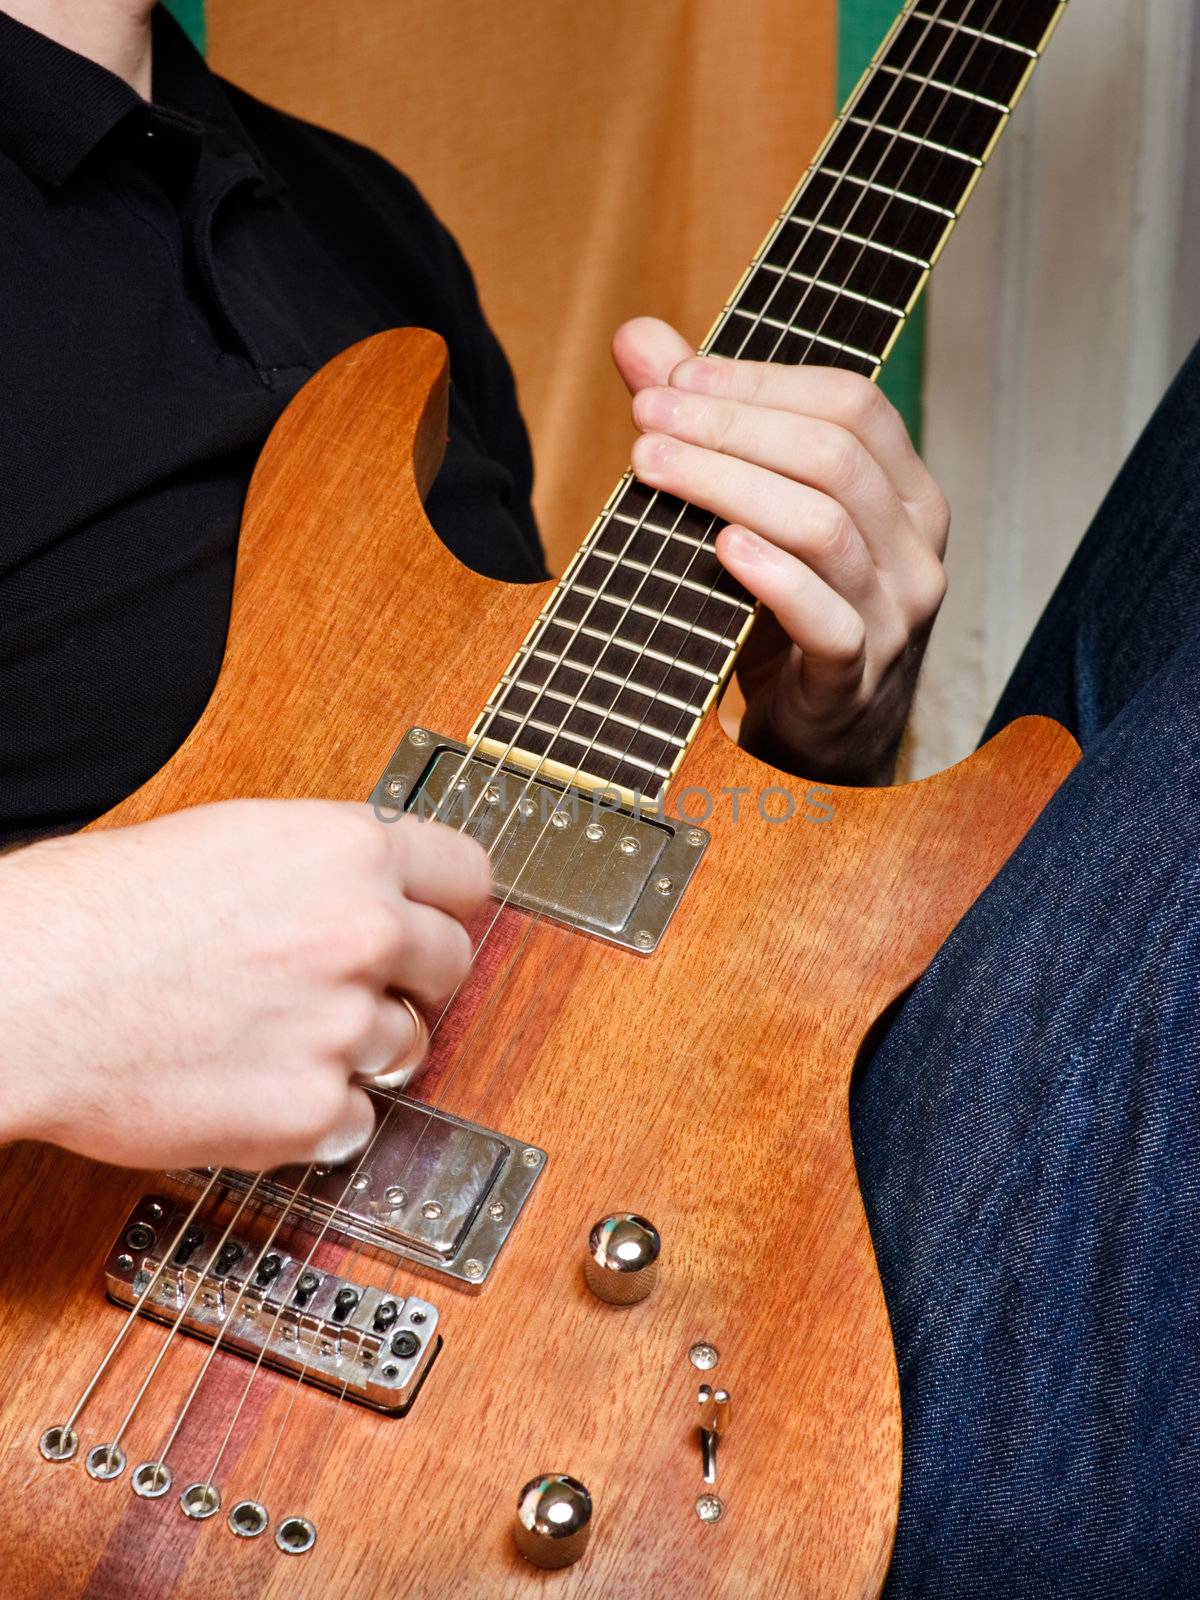 Musician playing electric guitar made of wood